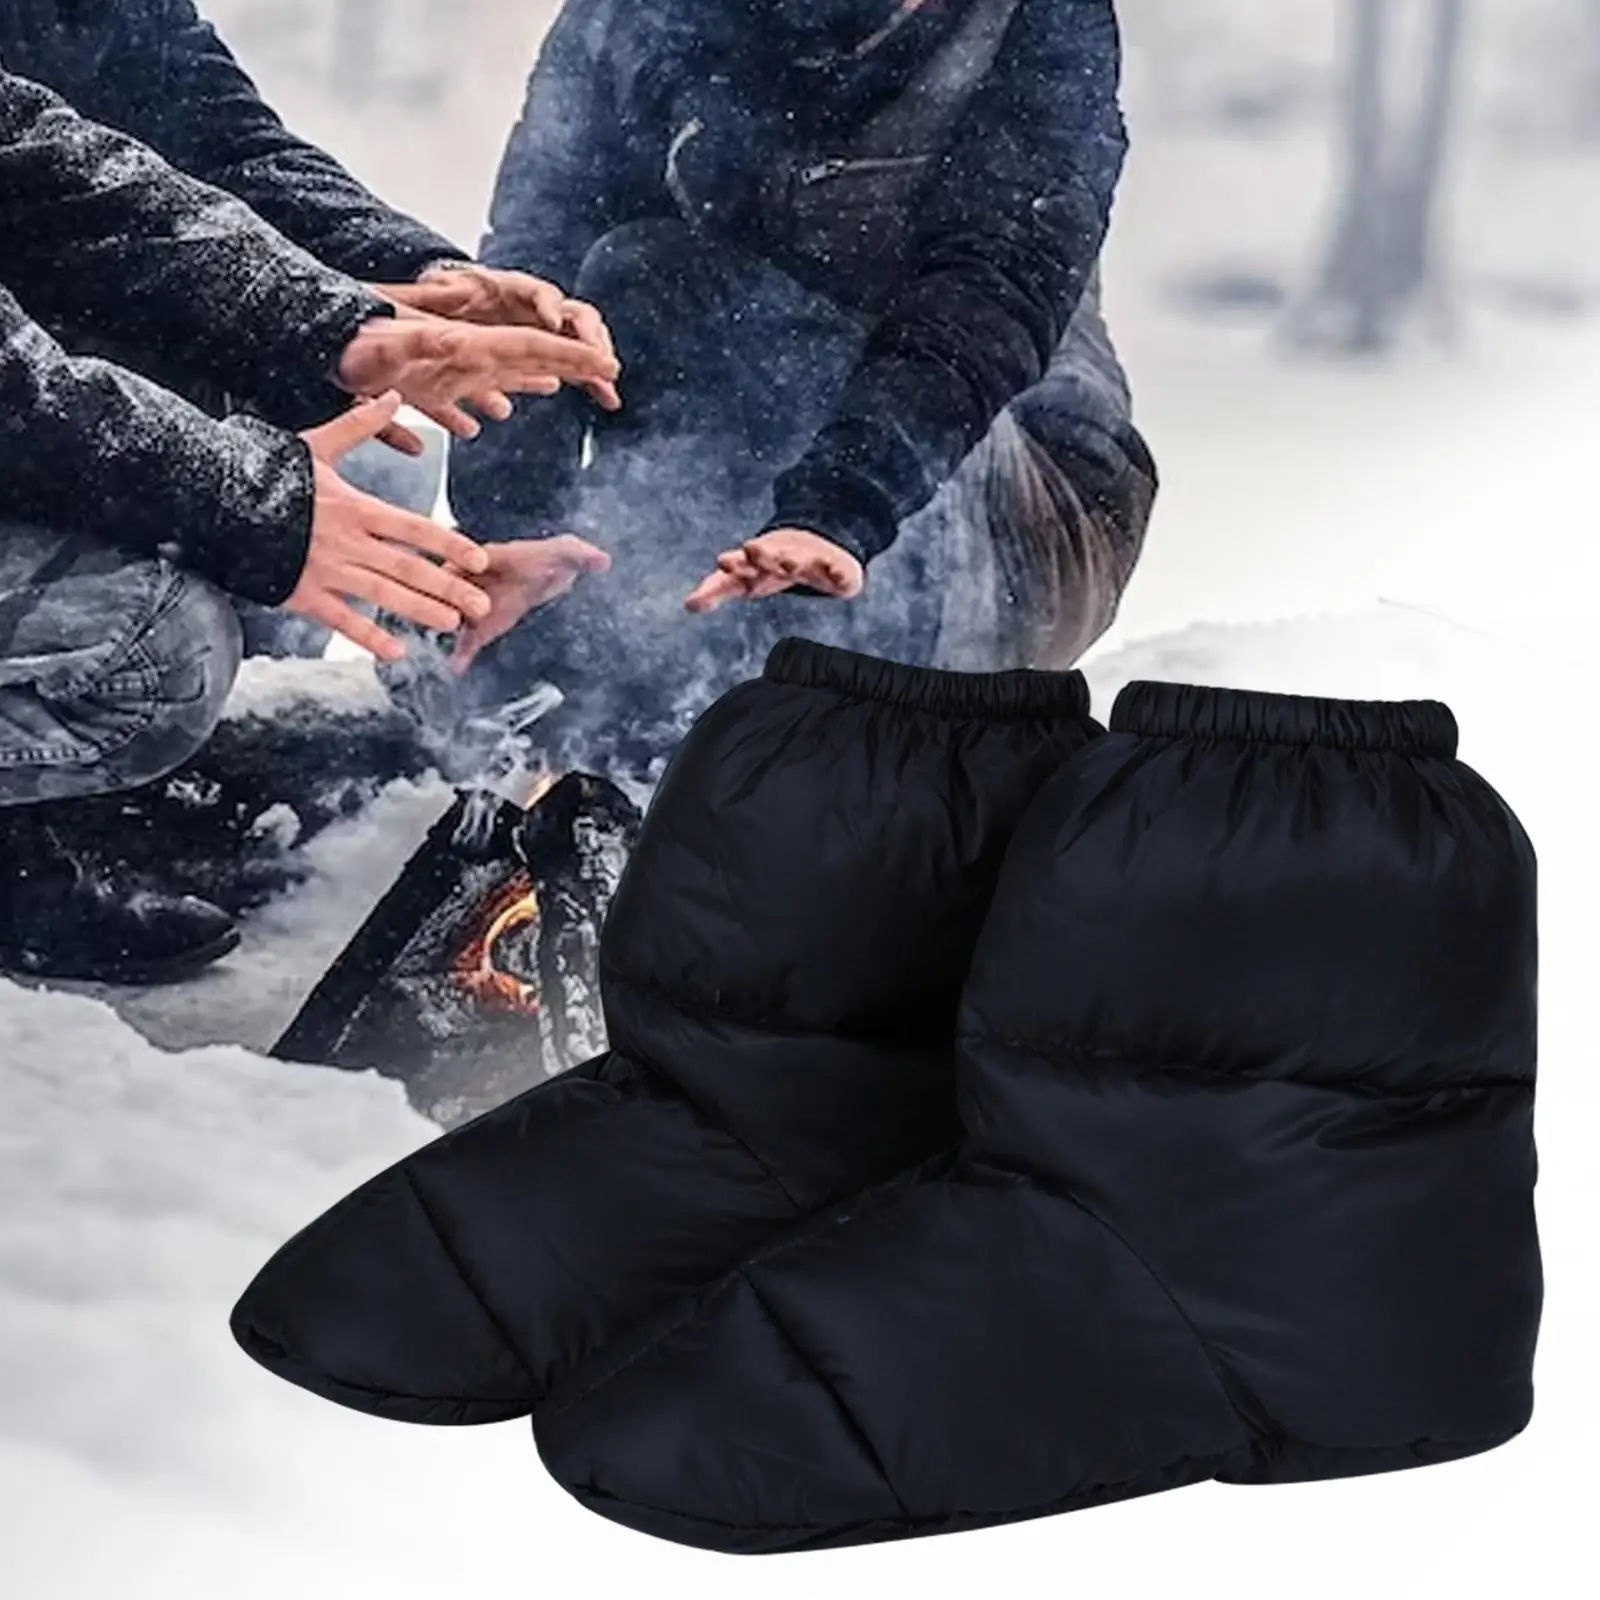 Winter Down Slippers Warm Bootie Shoes Waterproof Soft Adults Camp Tent Cozy Snow Boots for Bedroom Office Skiing Indoor Outdoor